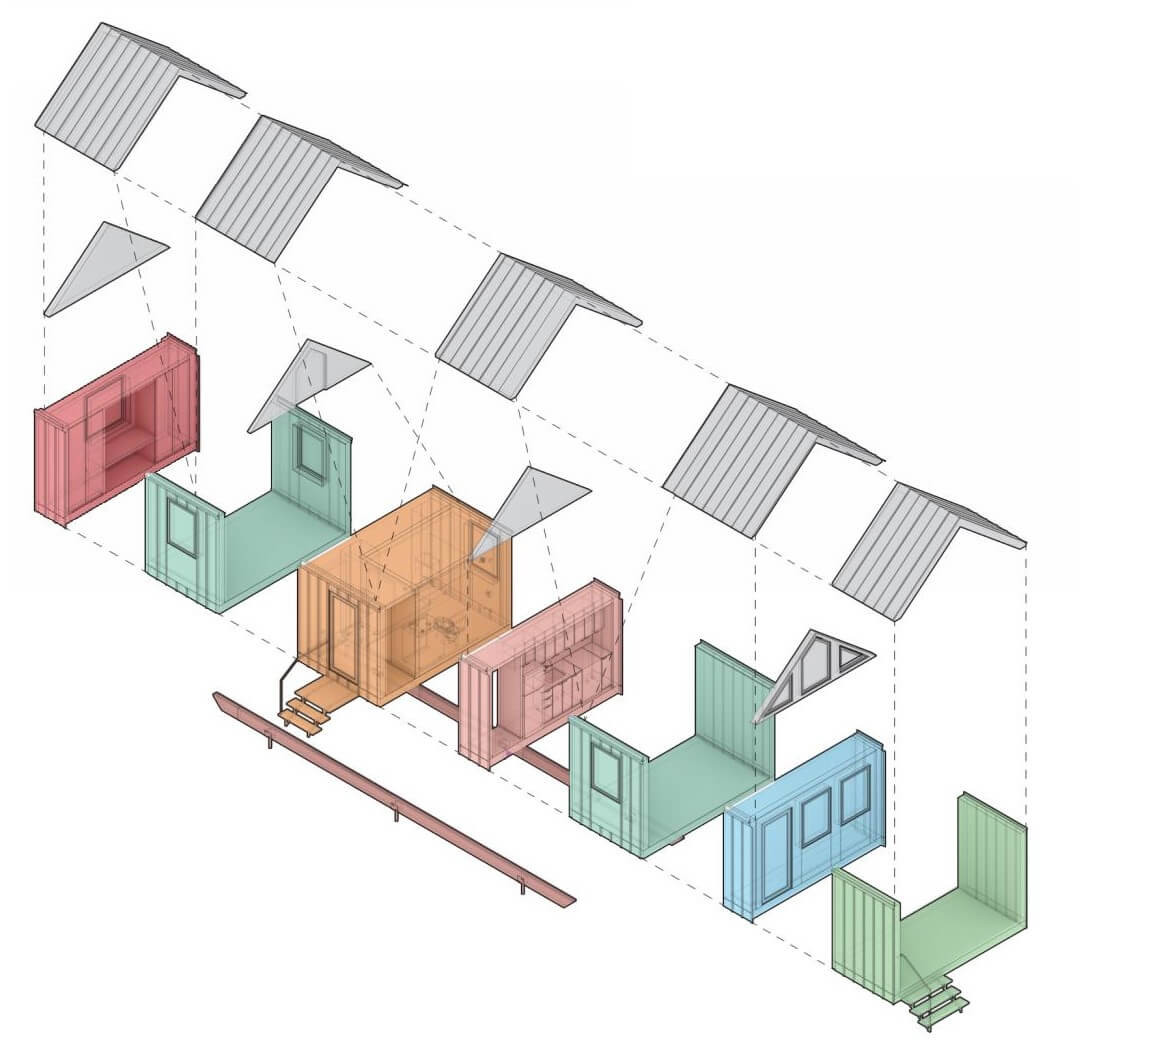 assembly diagram of a prefab home